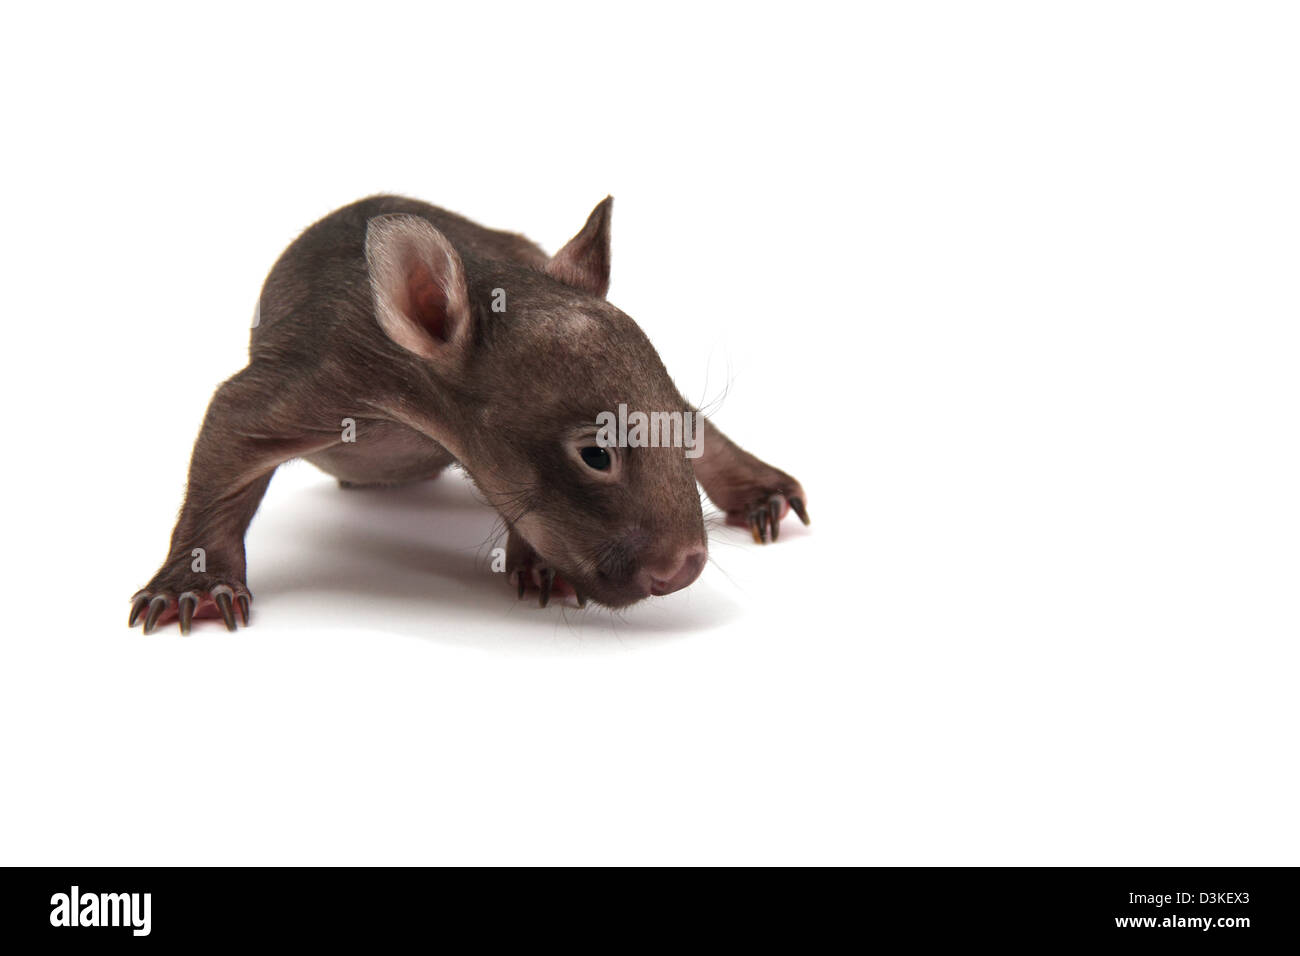 Common wombat infant photographed in a studio Stock Photo